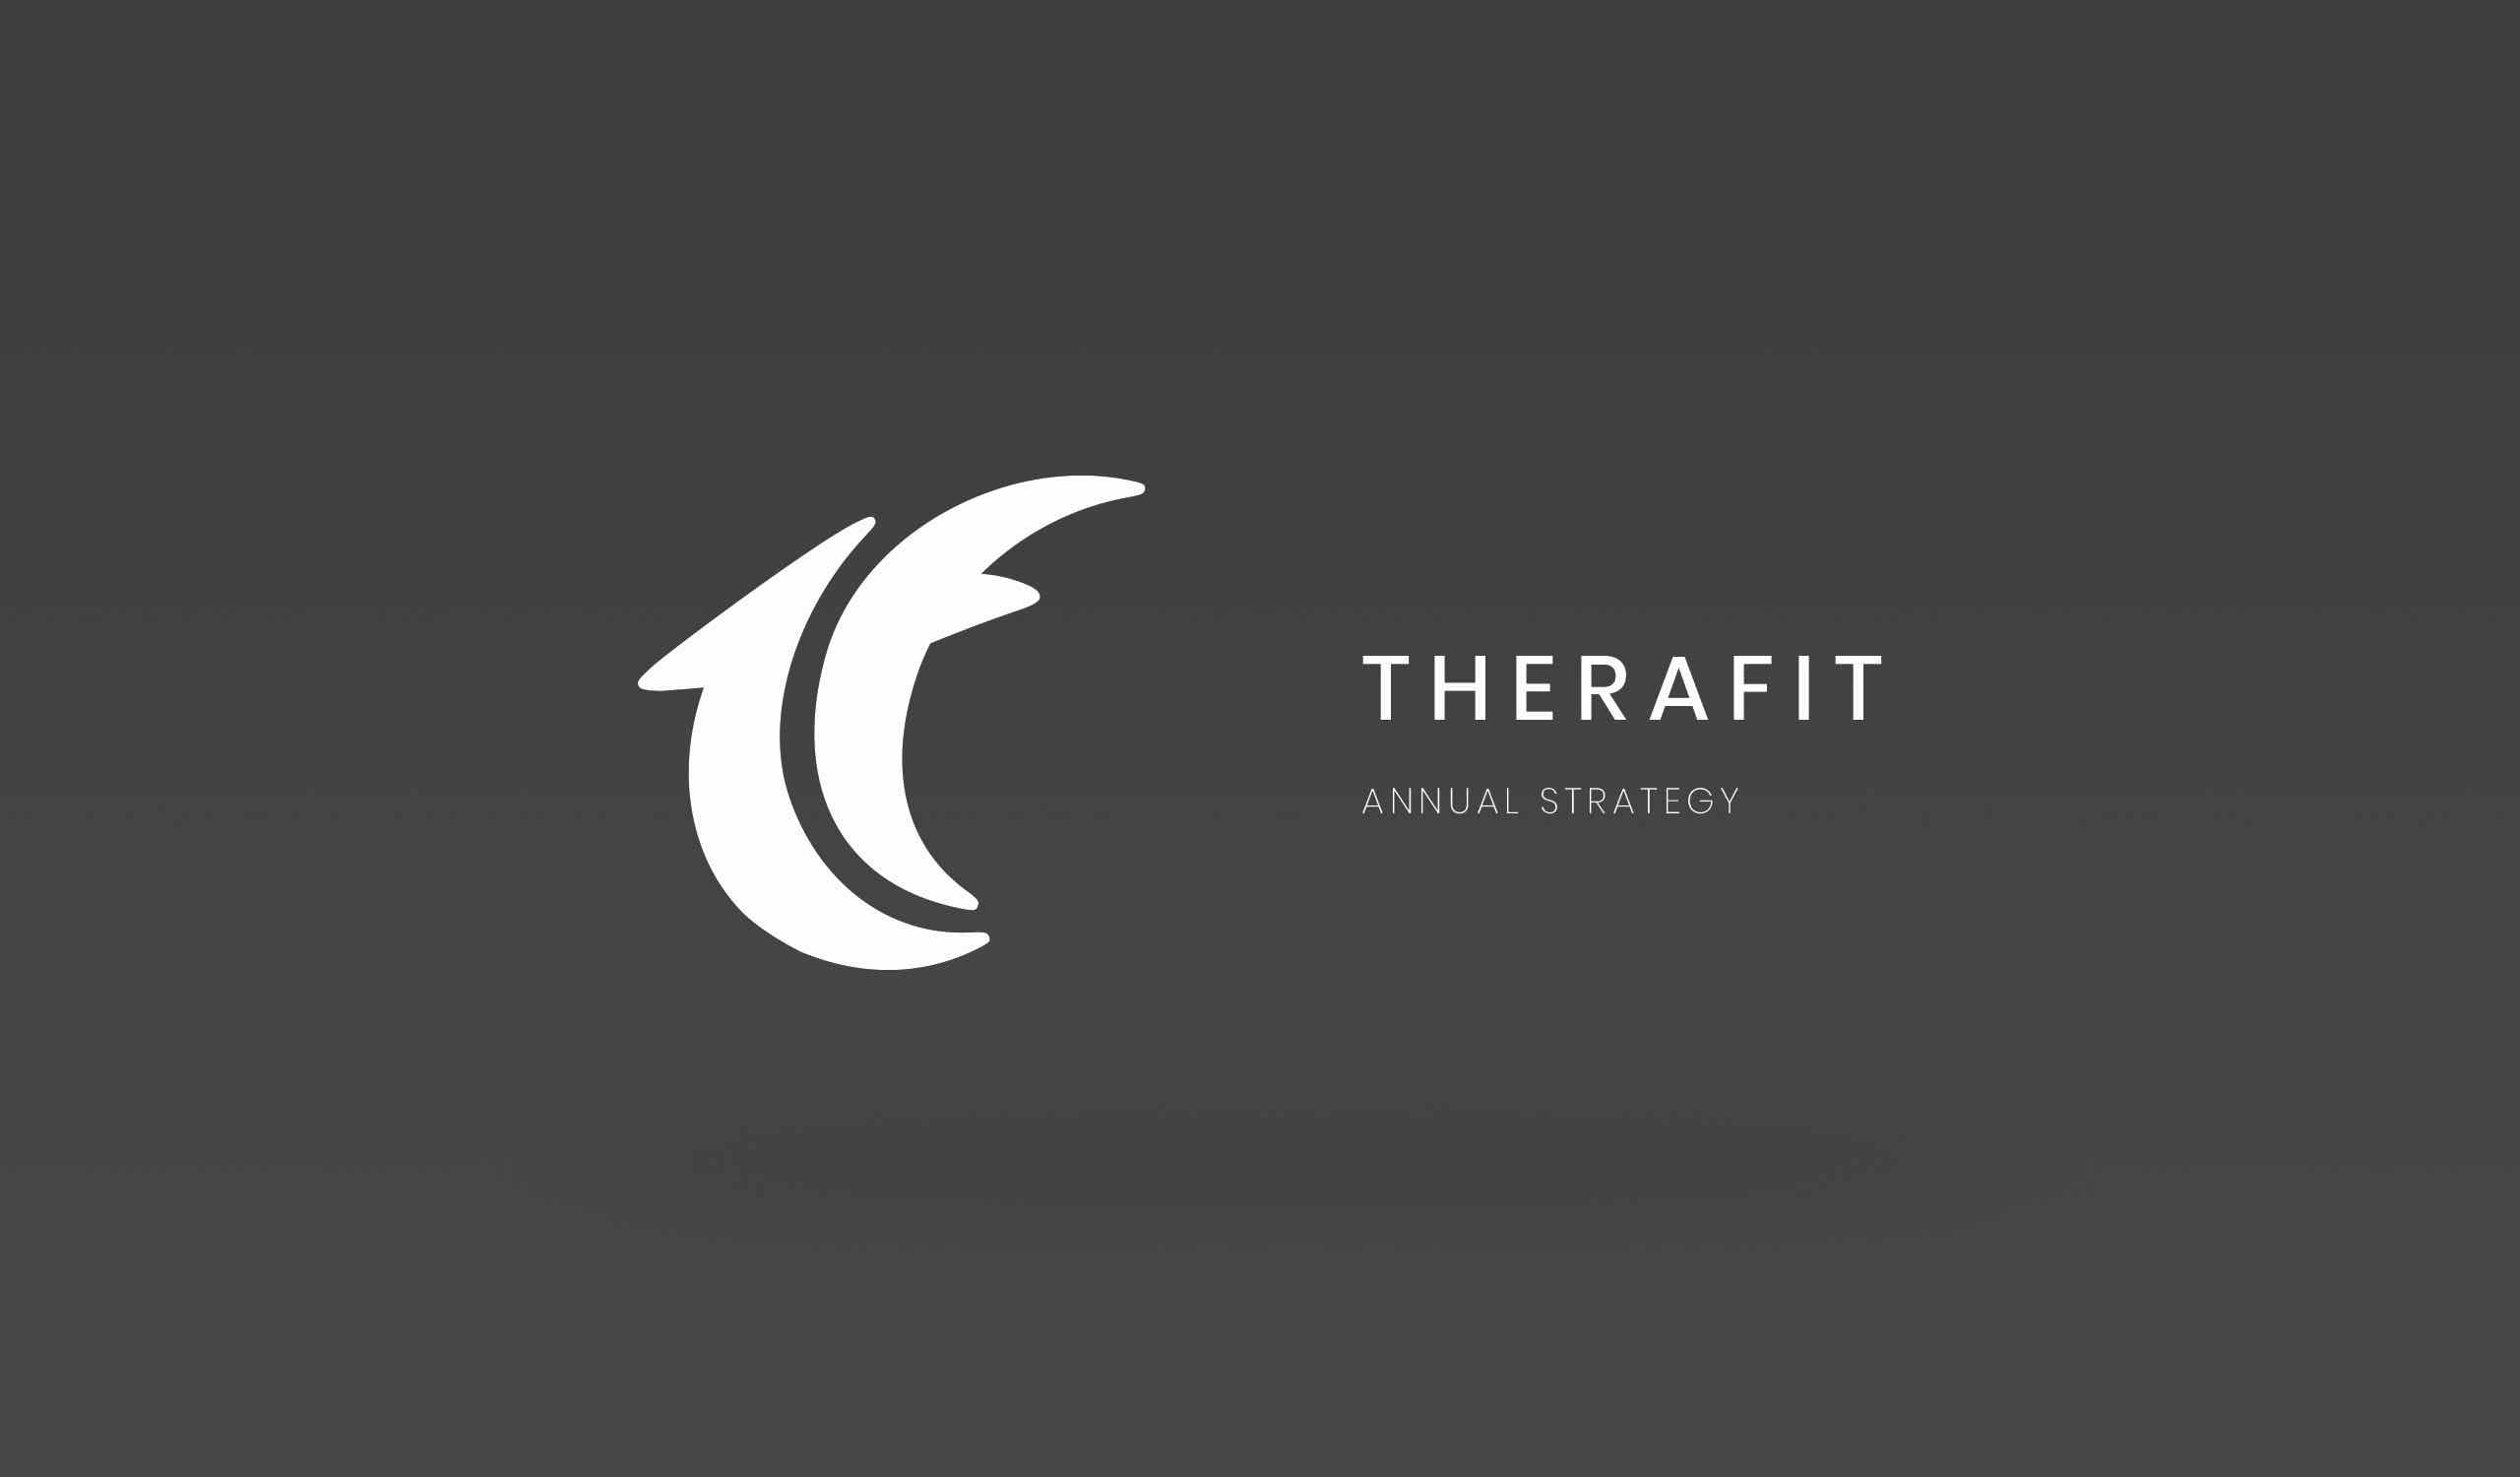 White Therafit Twelve month strategy logo on gray background